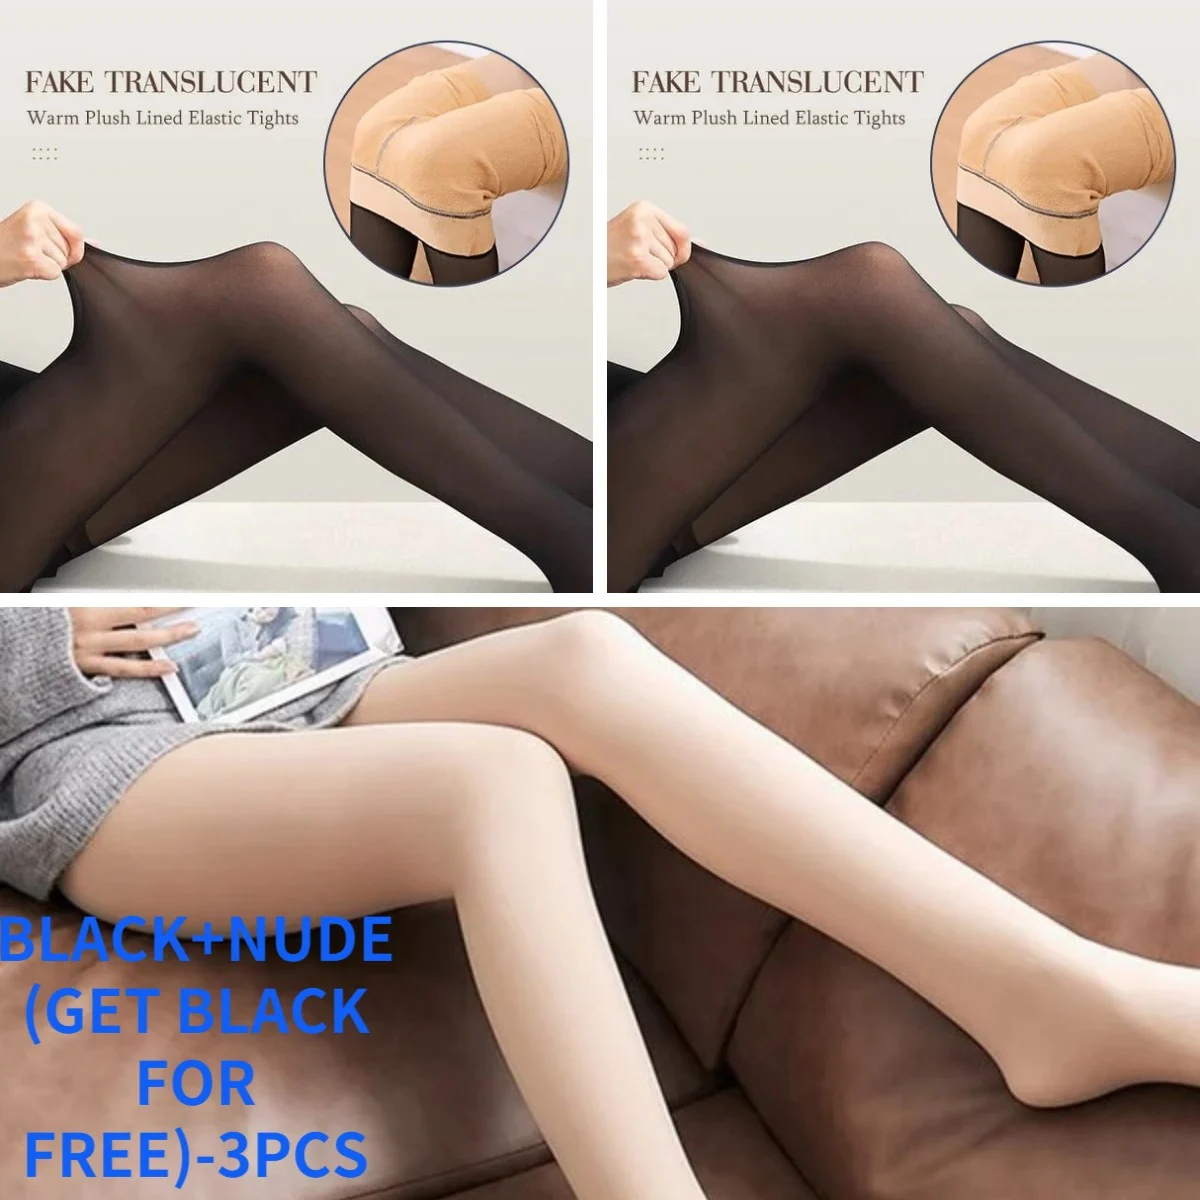 49% OFF🔥🔥-Flawless Legs Fake Translucent Warm Plush Lined Elastic Tights